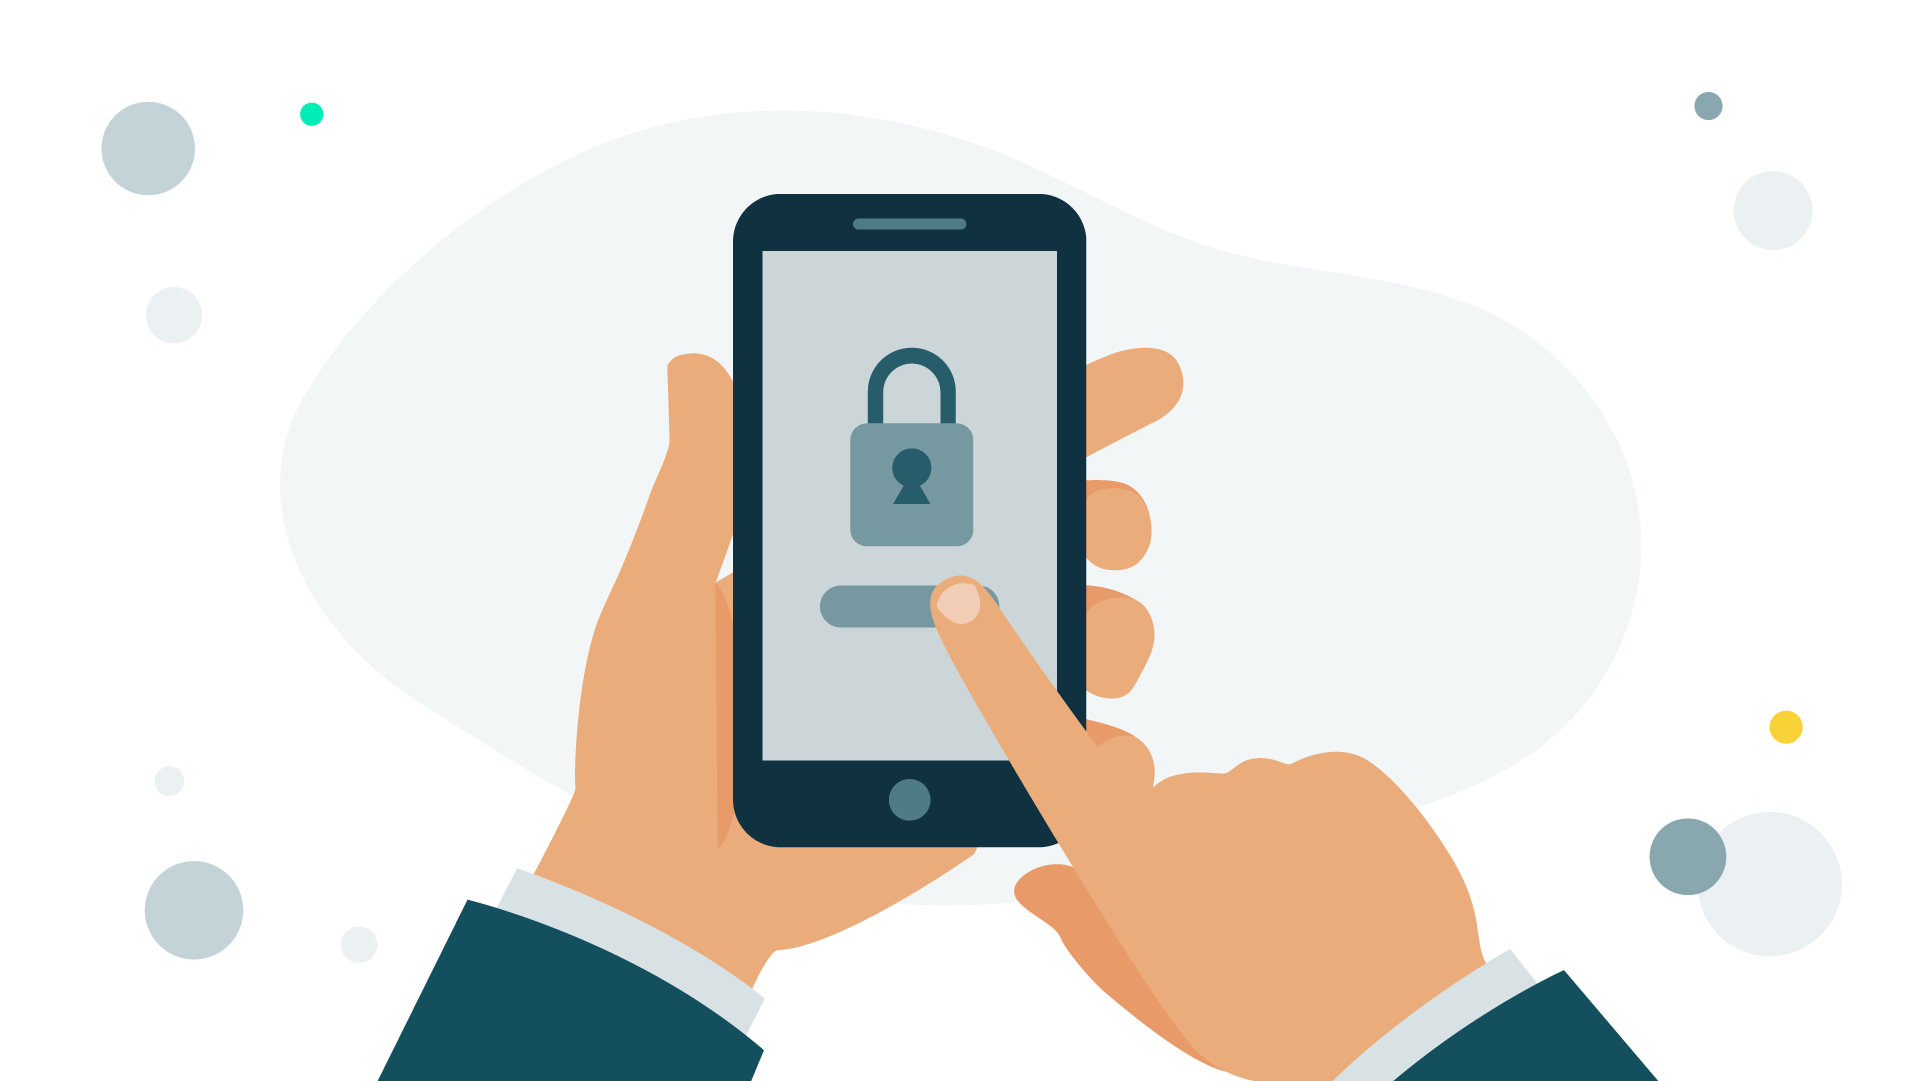 Decorative image: someone holding a mobile device with a picture of a padlock on the screen.